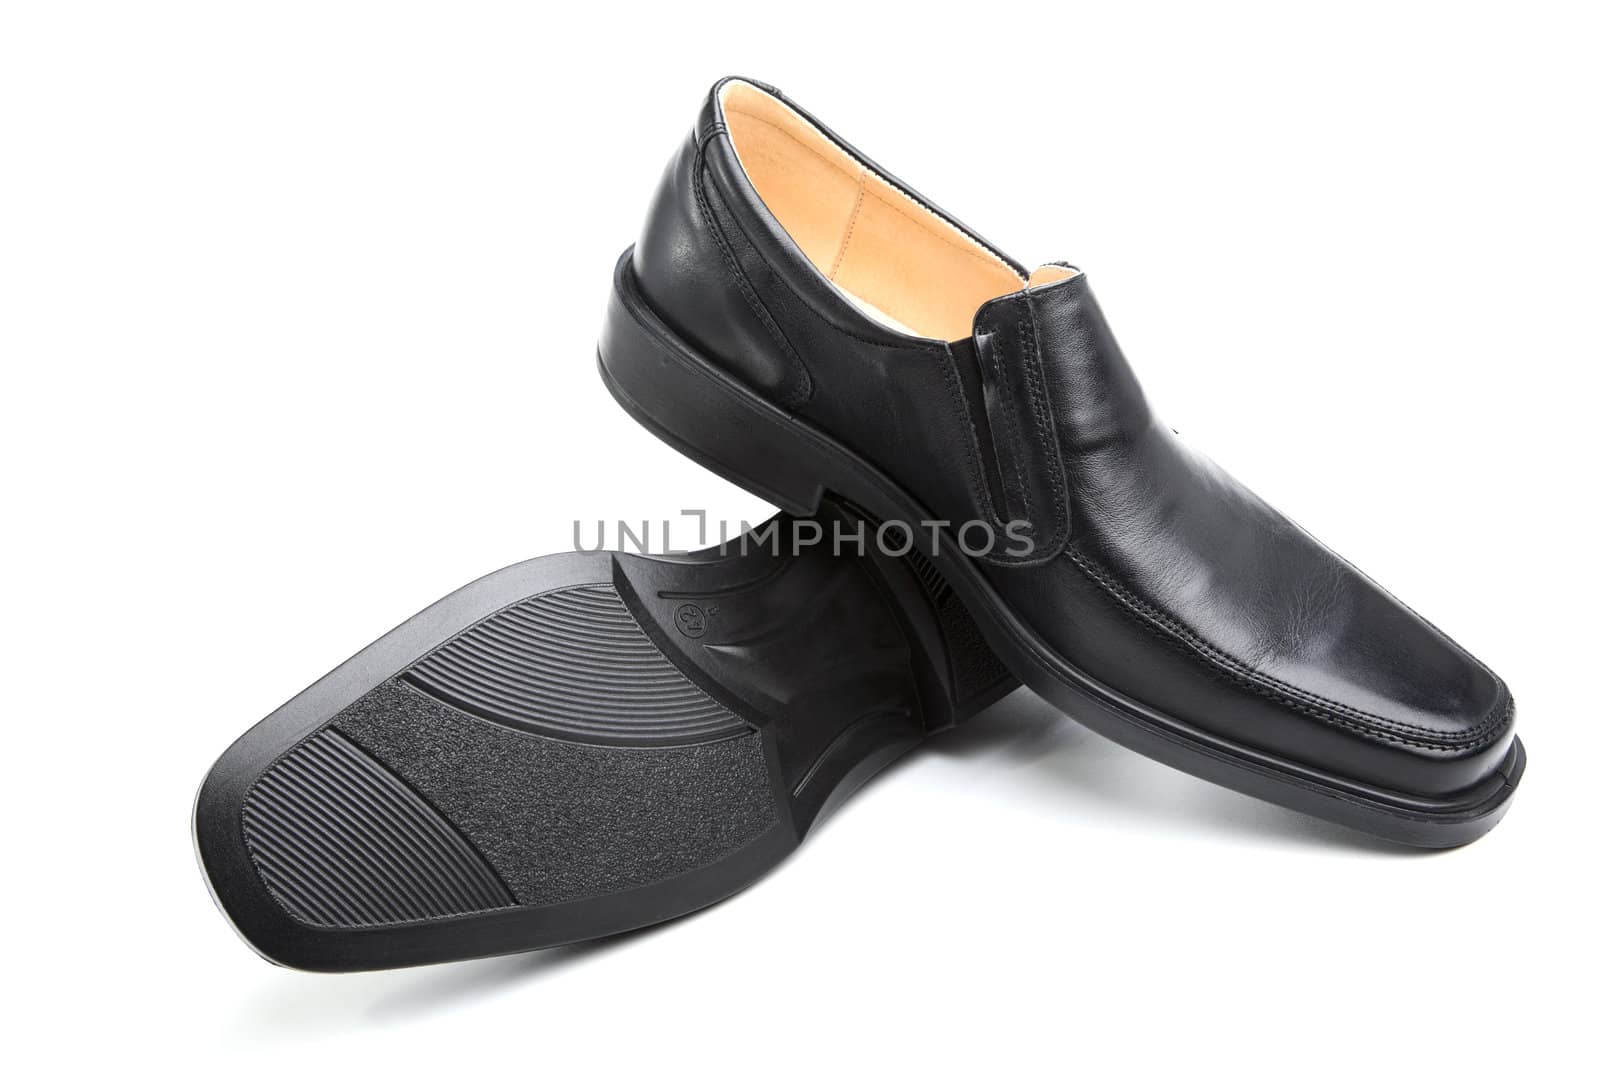 Pair of black man's shoes on a white background